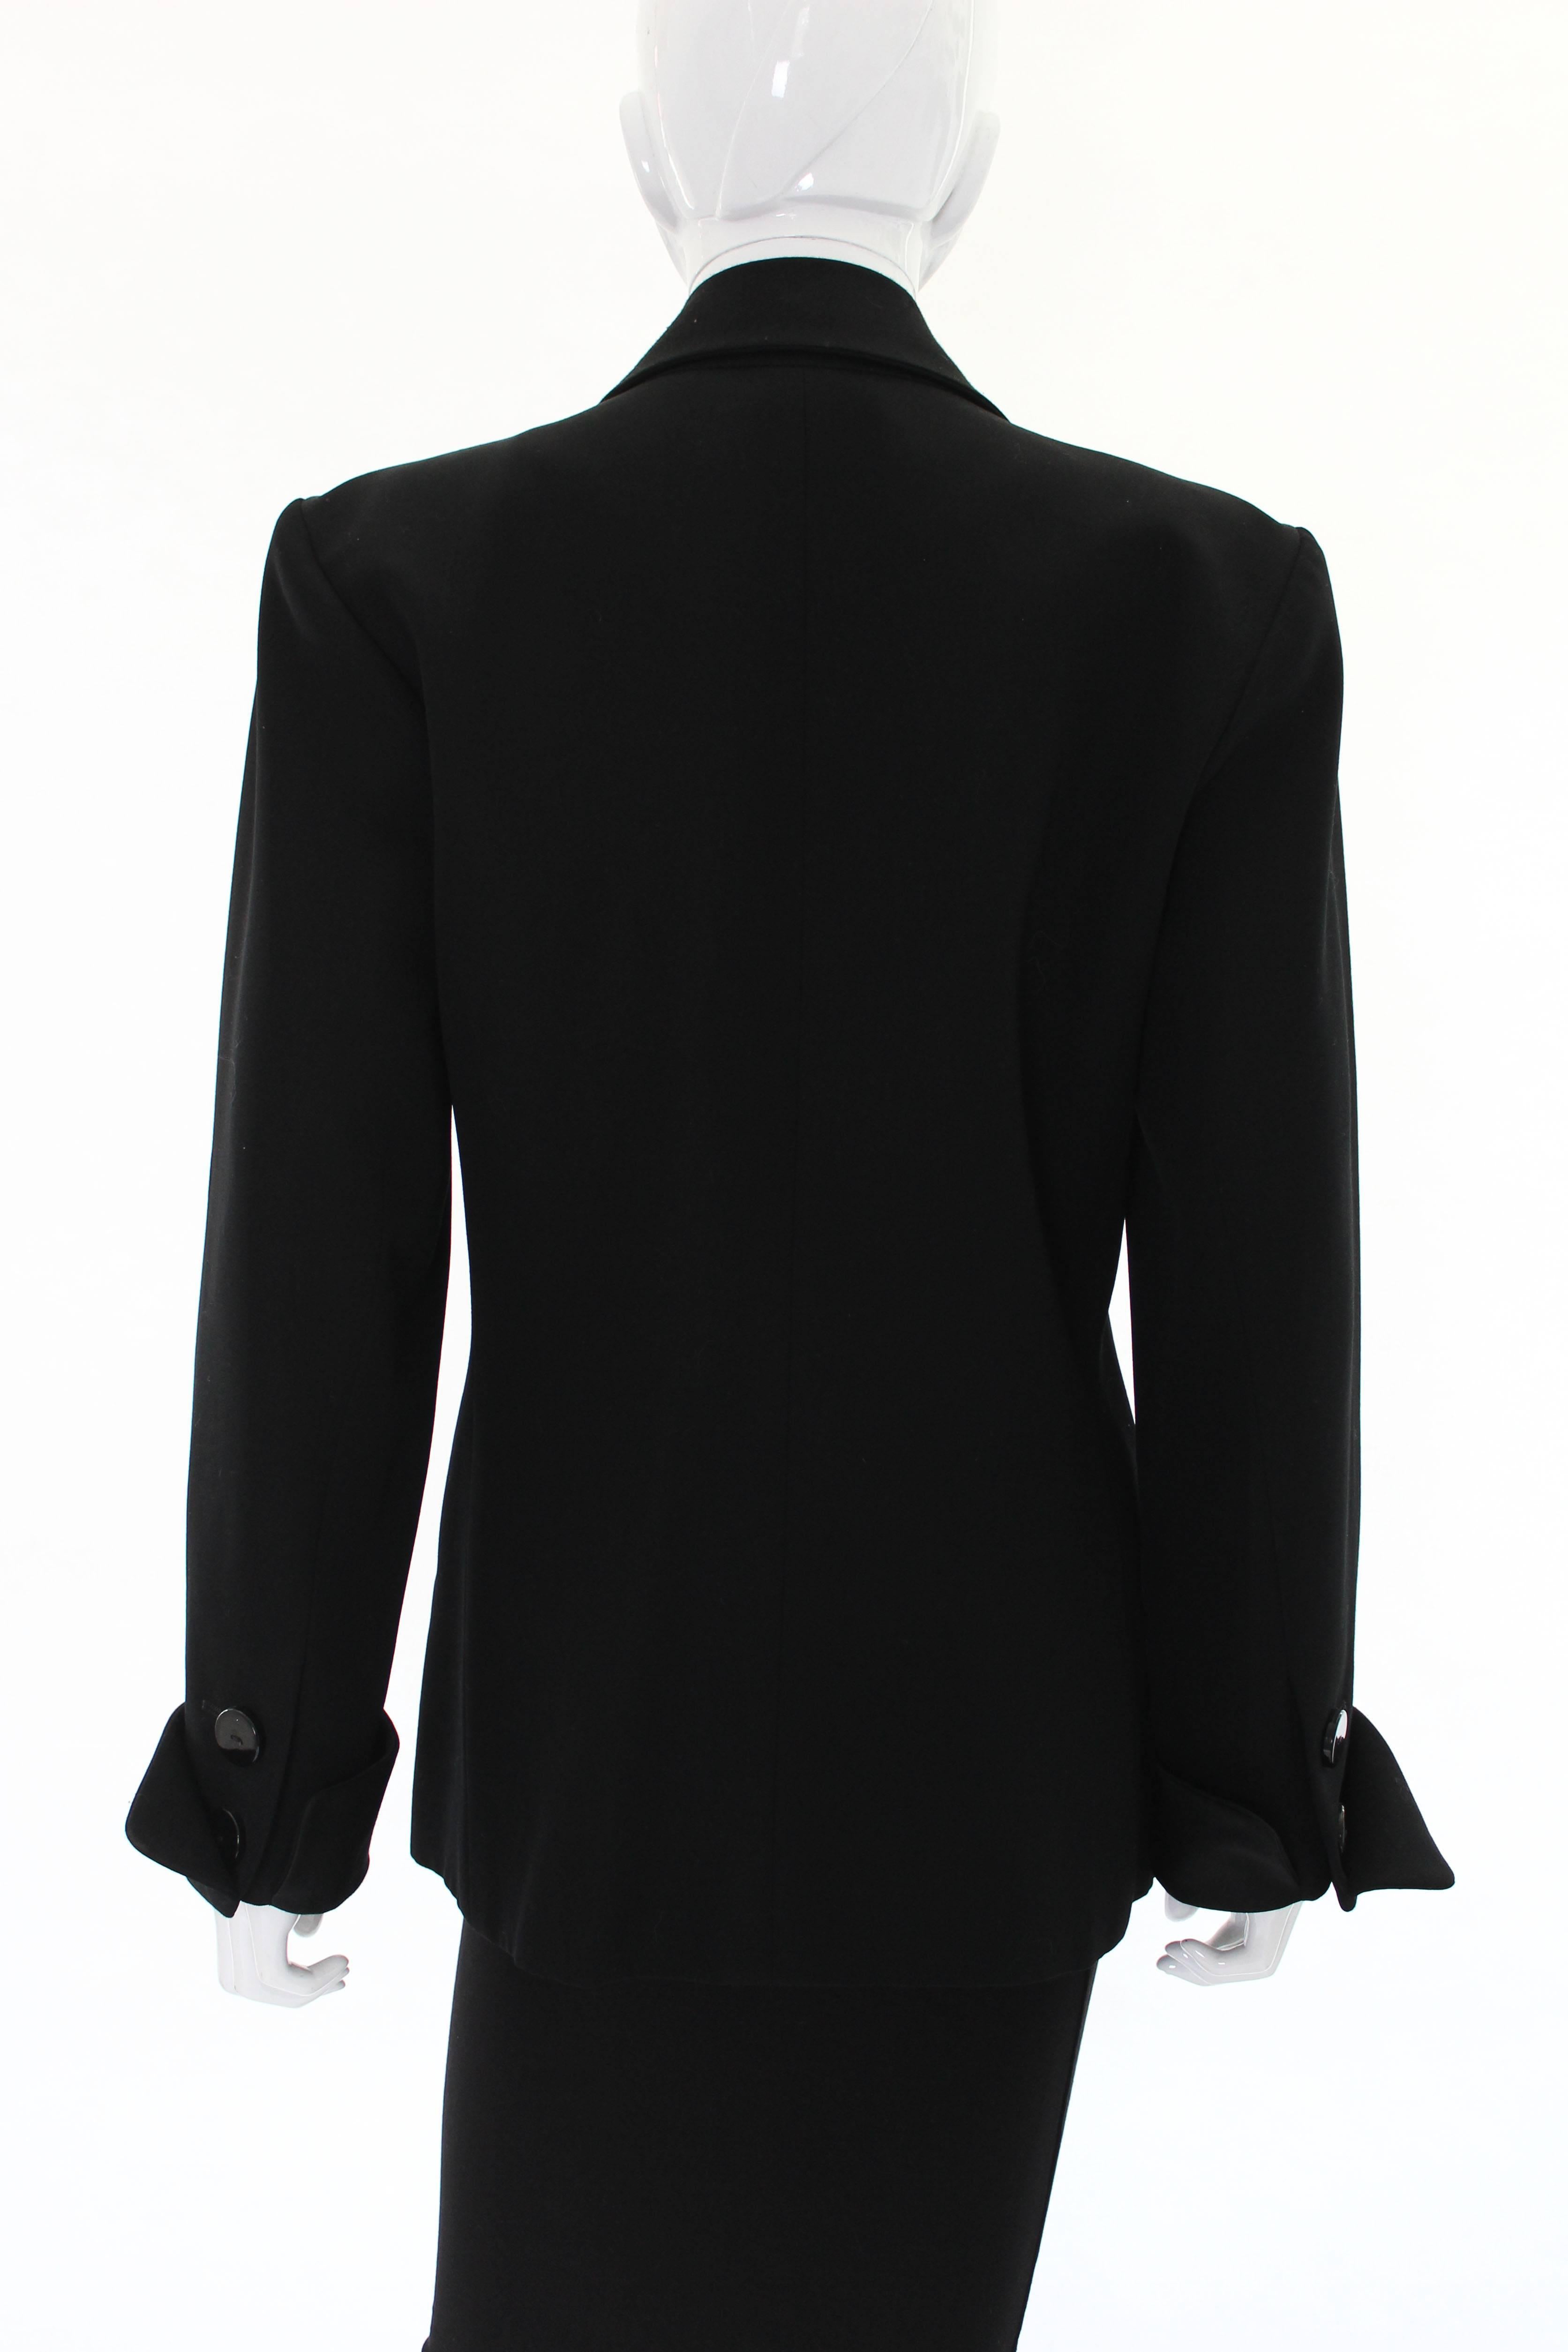 Yves Saint Laurent Rive Gauche Smoking Jacket In Good Condition In London, GB